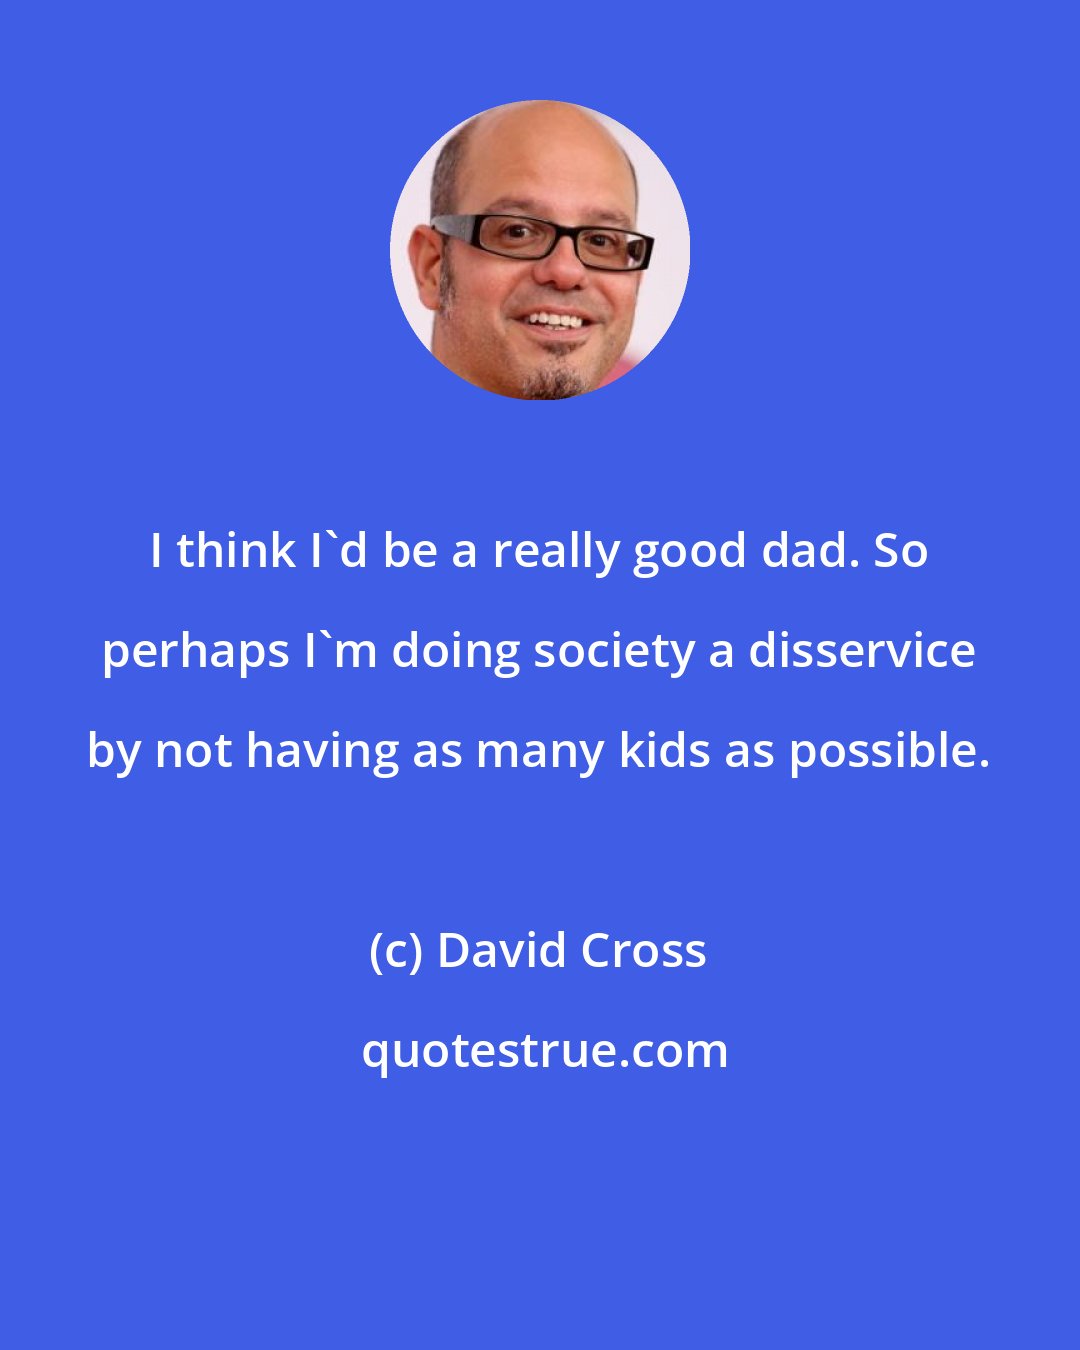 David Cross: I think I'd be a really good dad. So perhaps I'm doing society a disservice by not having as many kids as possible.